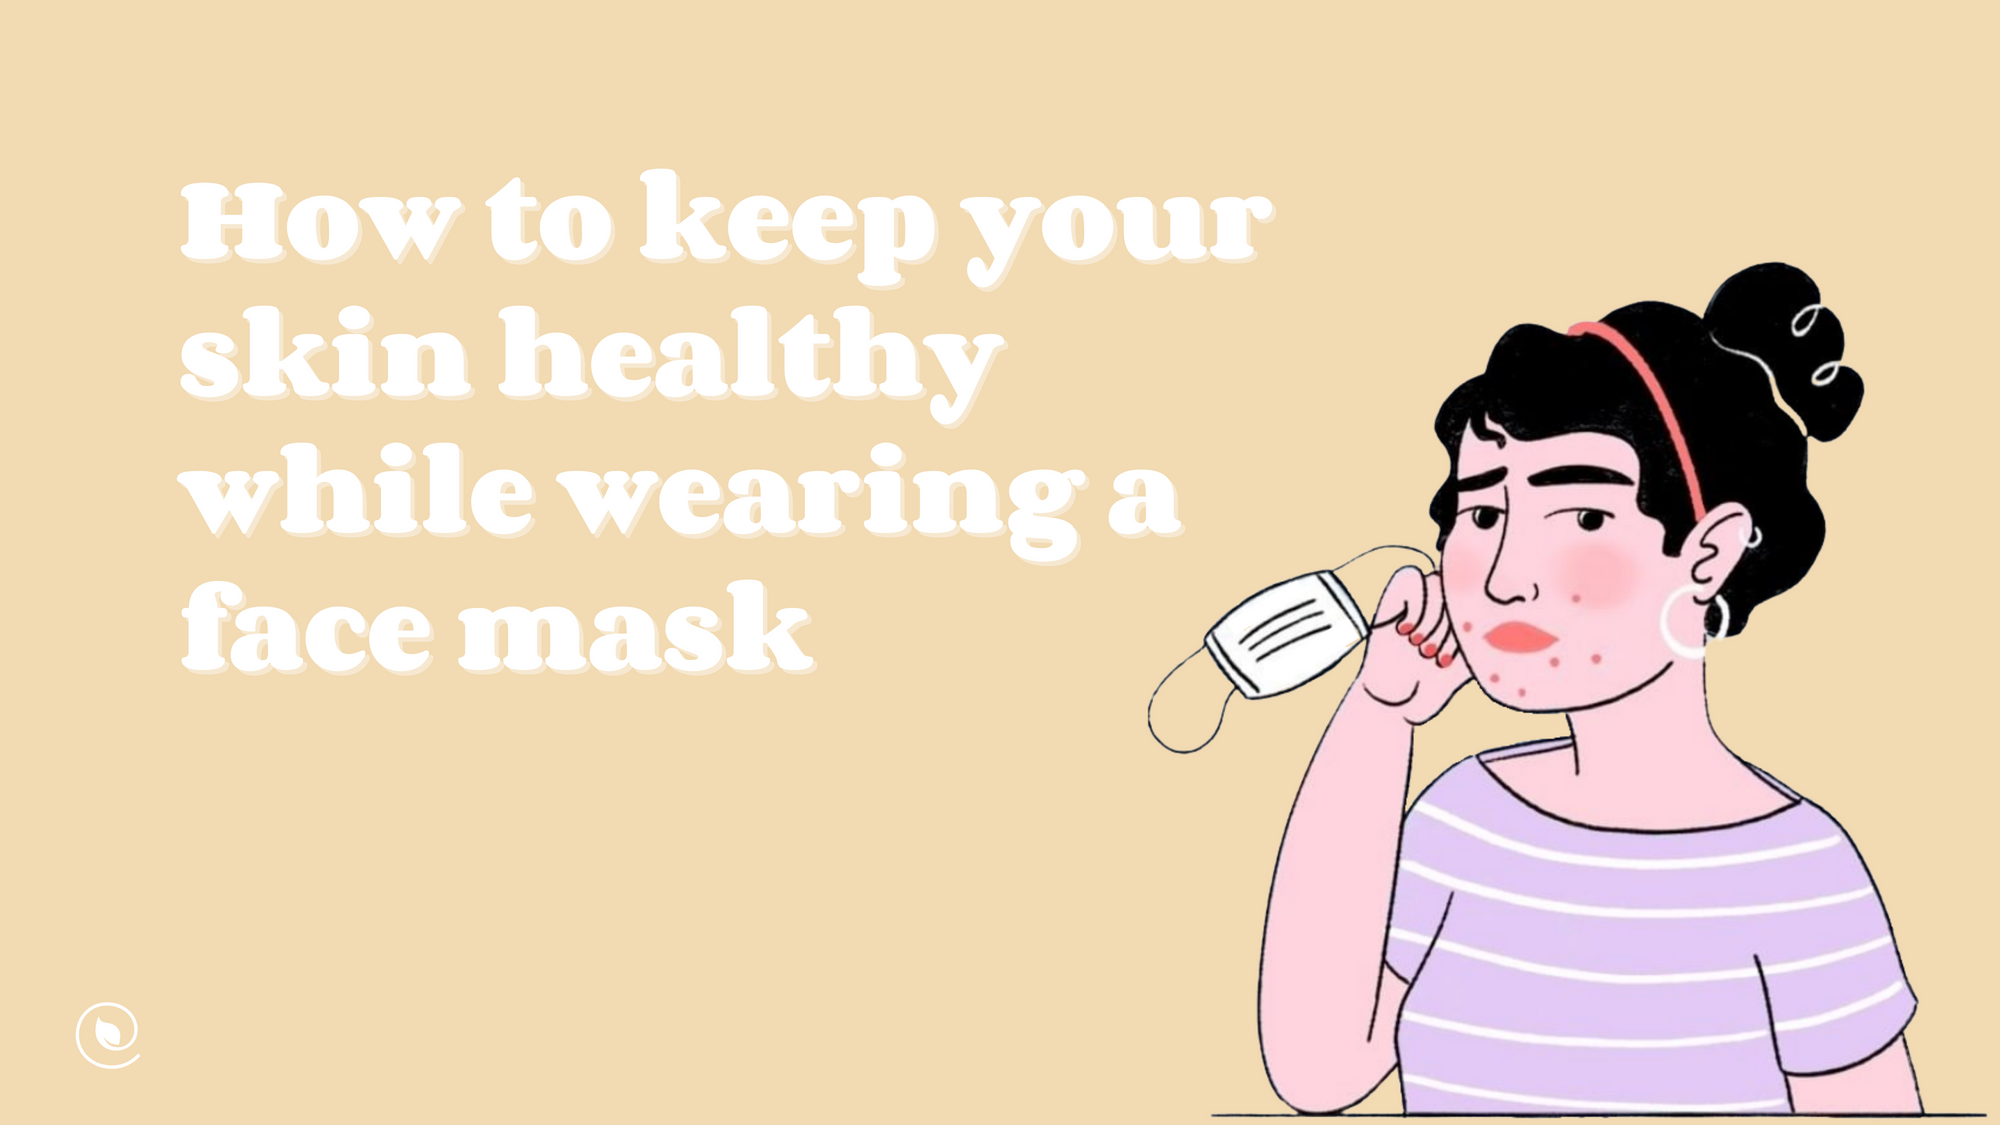 The Secret to Keeping Your Skin Healthy While Wearing a Face Mask